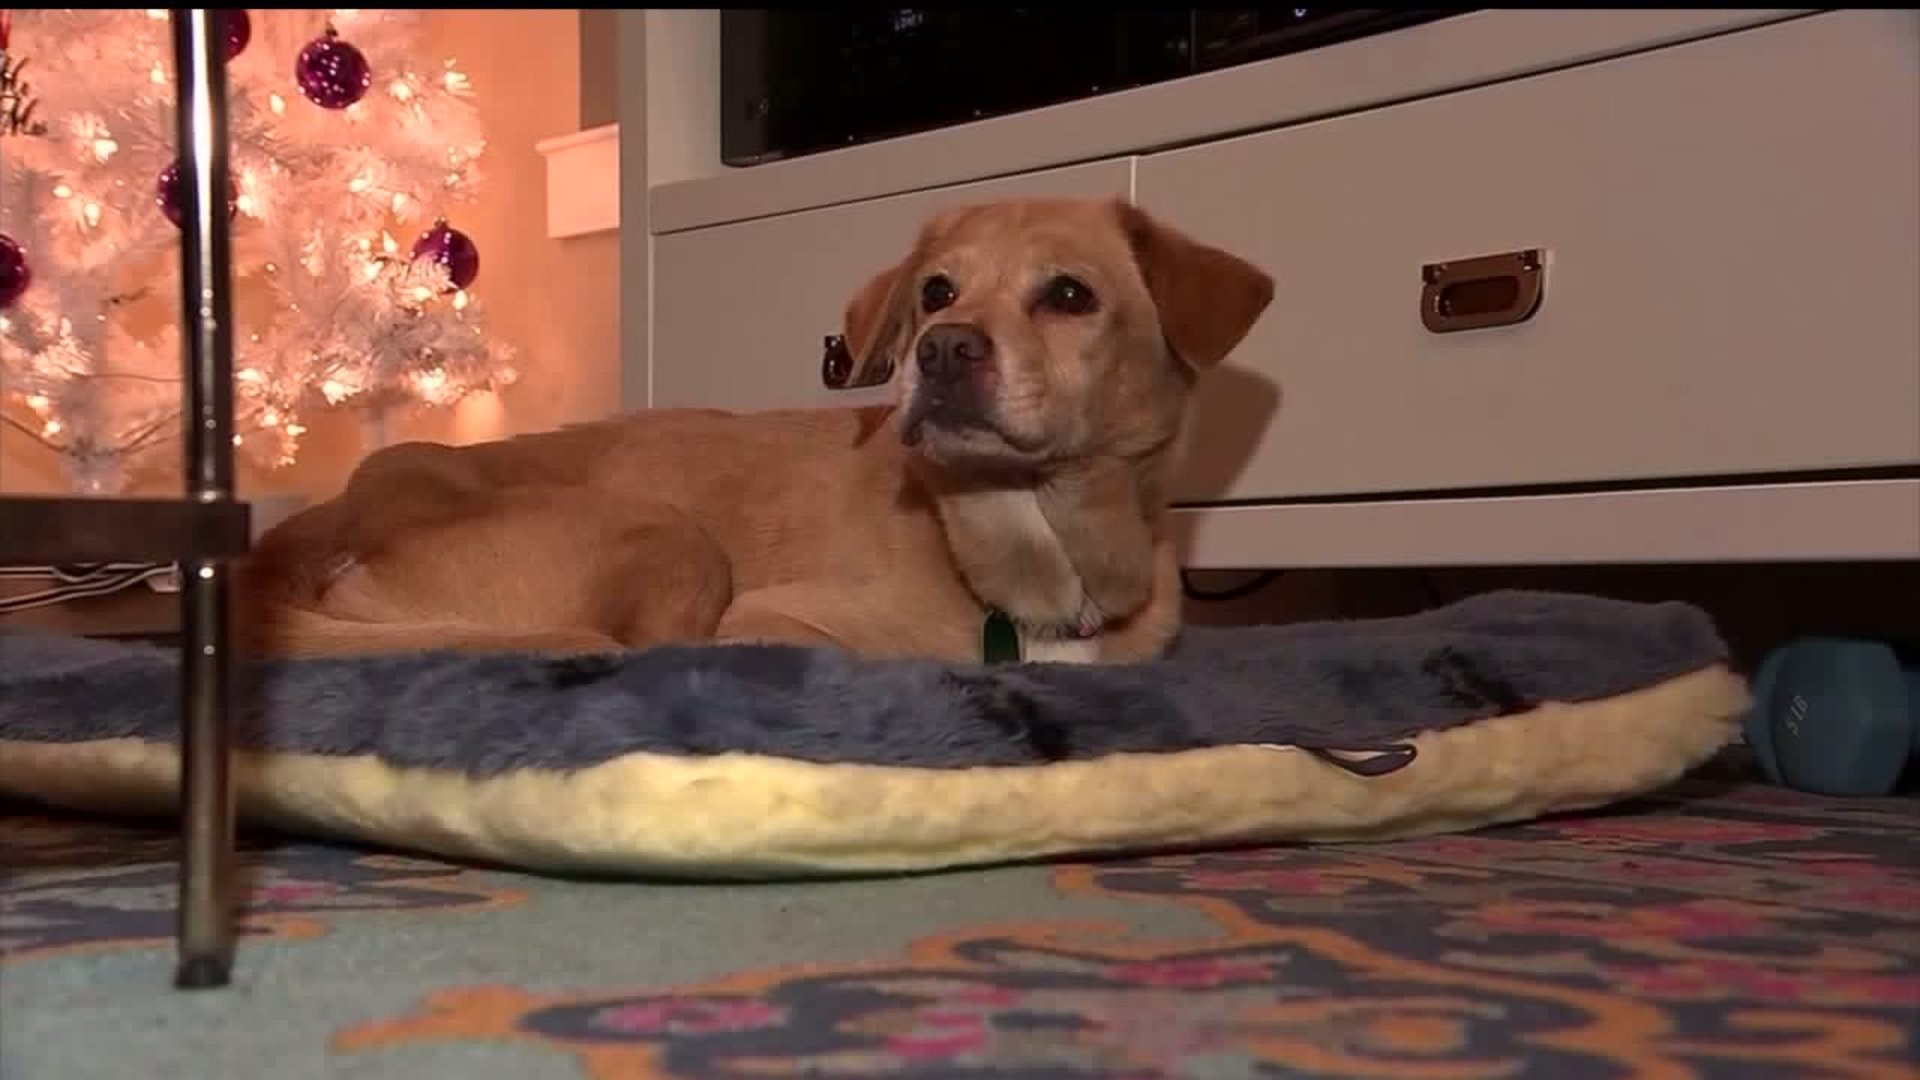 How this sneaky dog found herself a new home